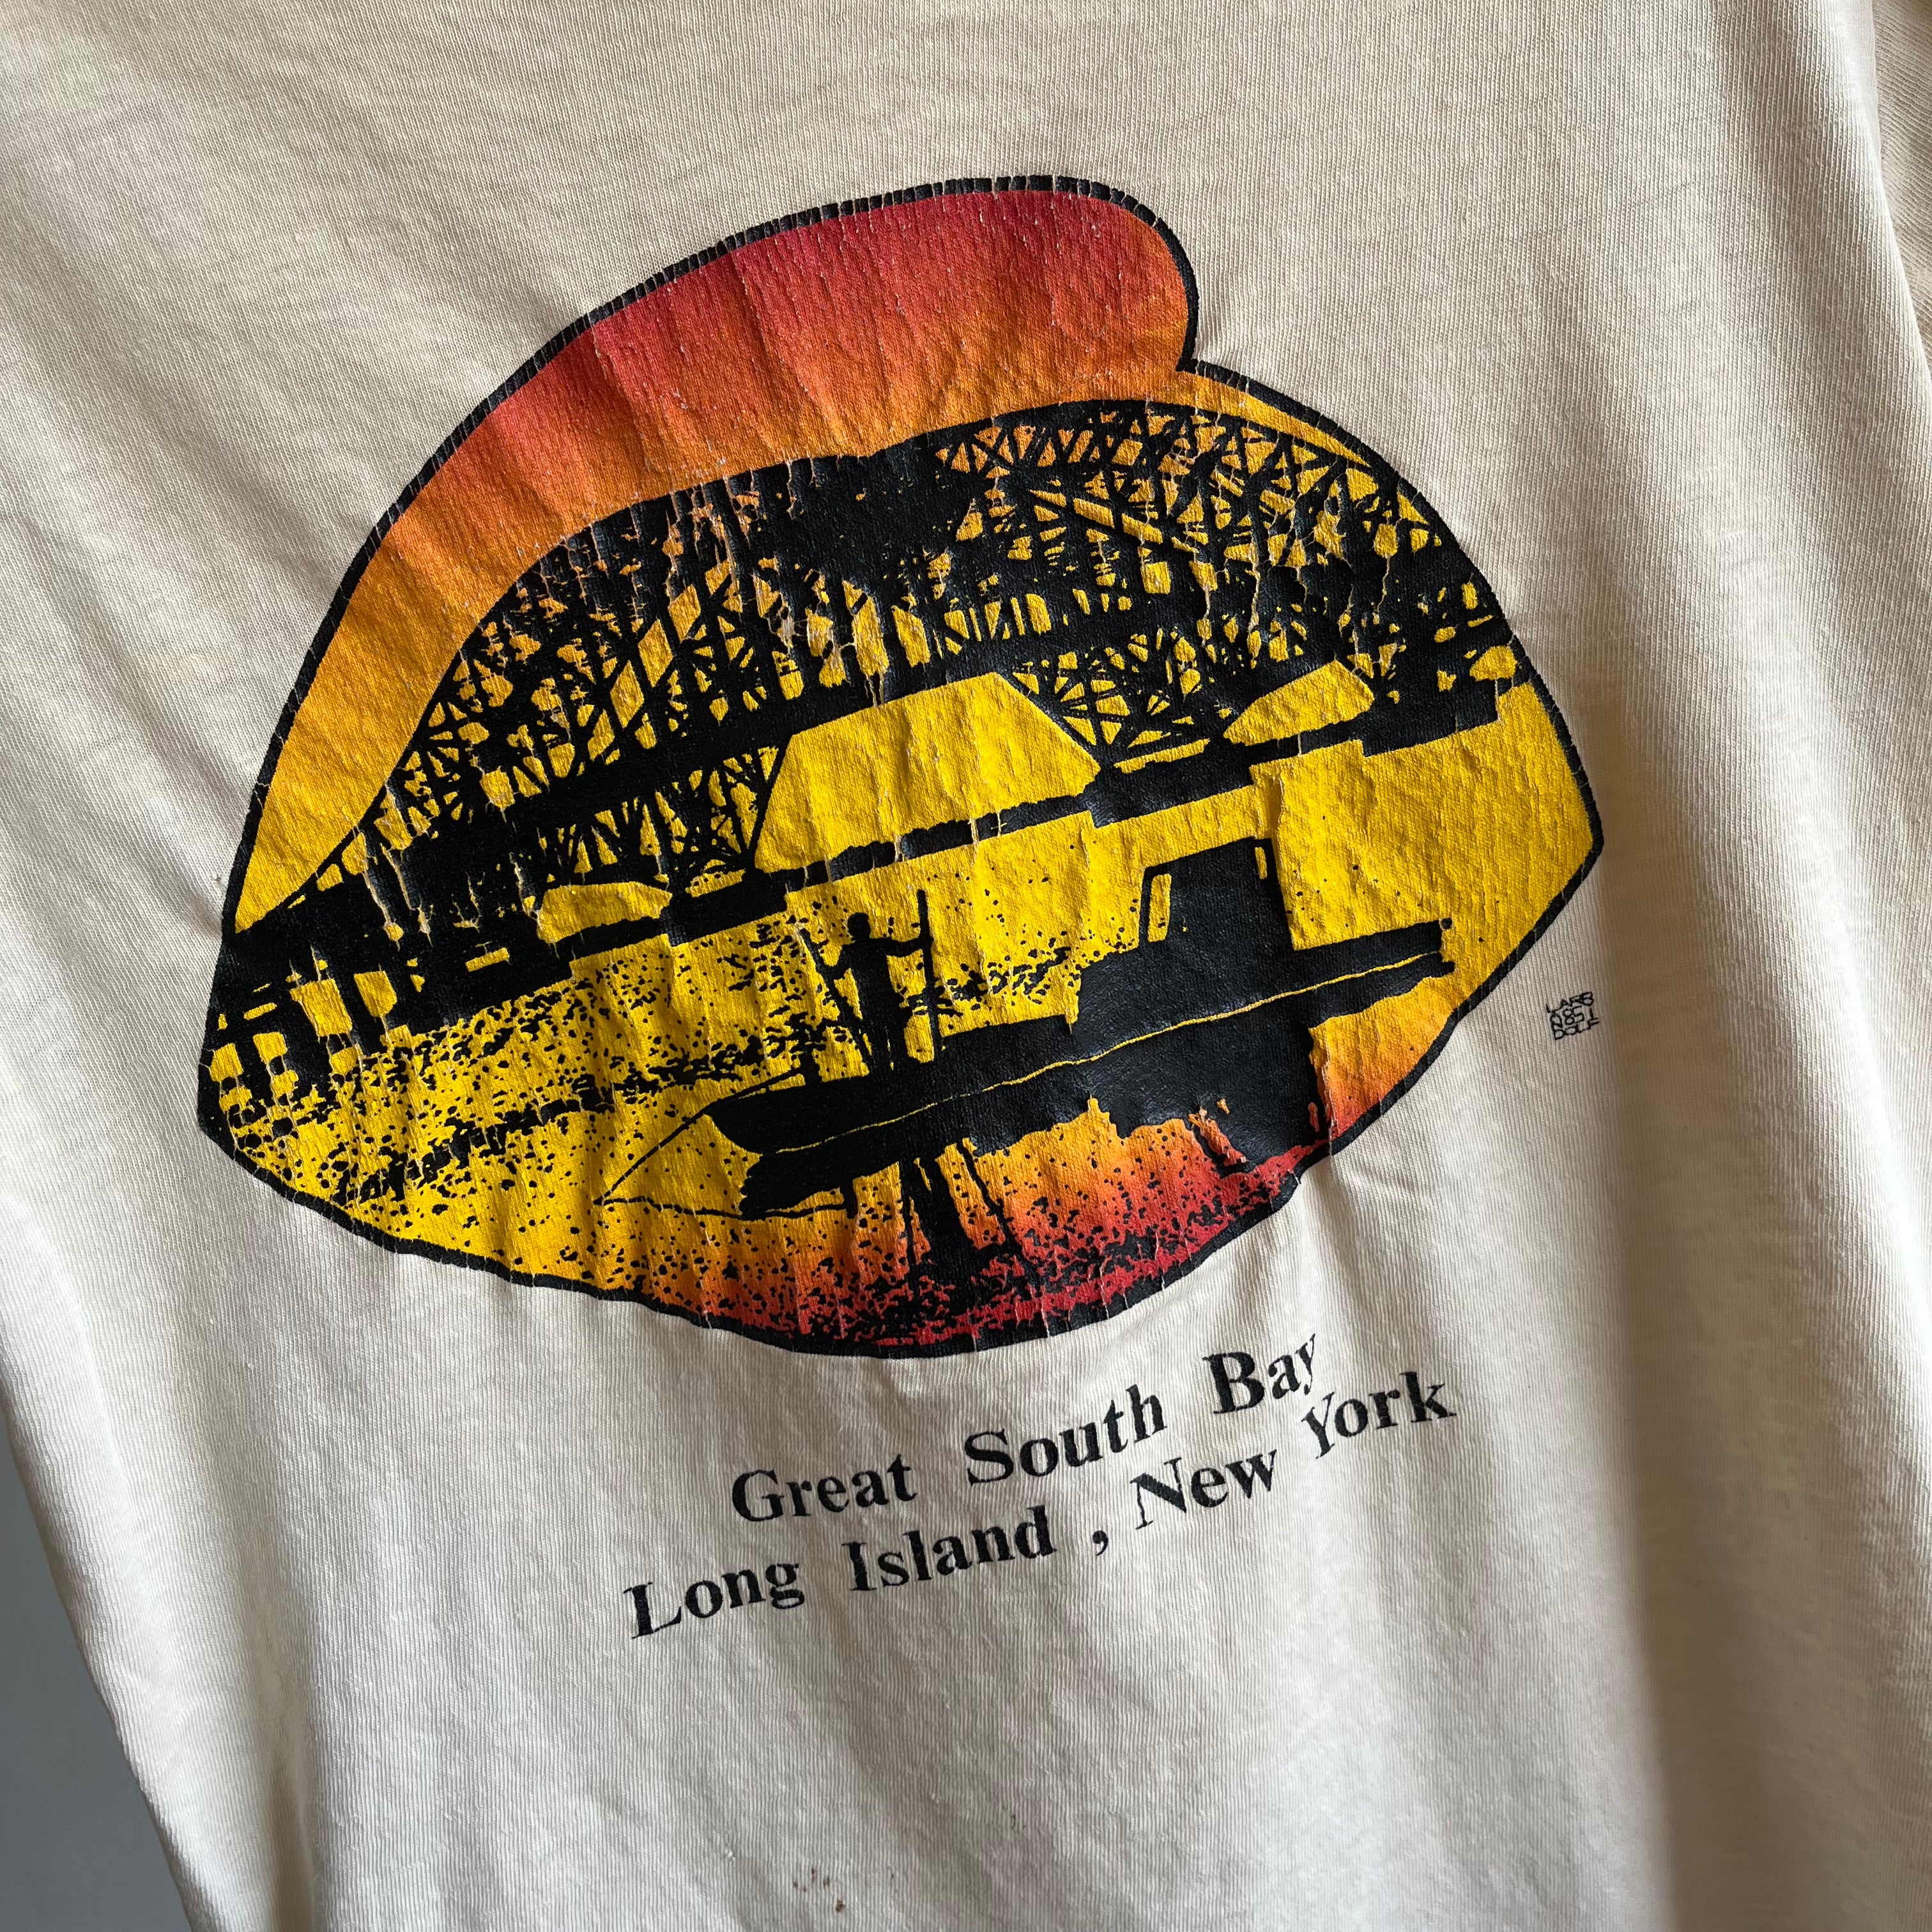 1980s Great South Bay, Long Island Aged Stained (Now Ecru) Almost Paper Thin T-Shirt